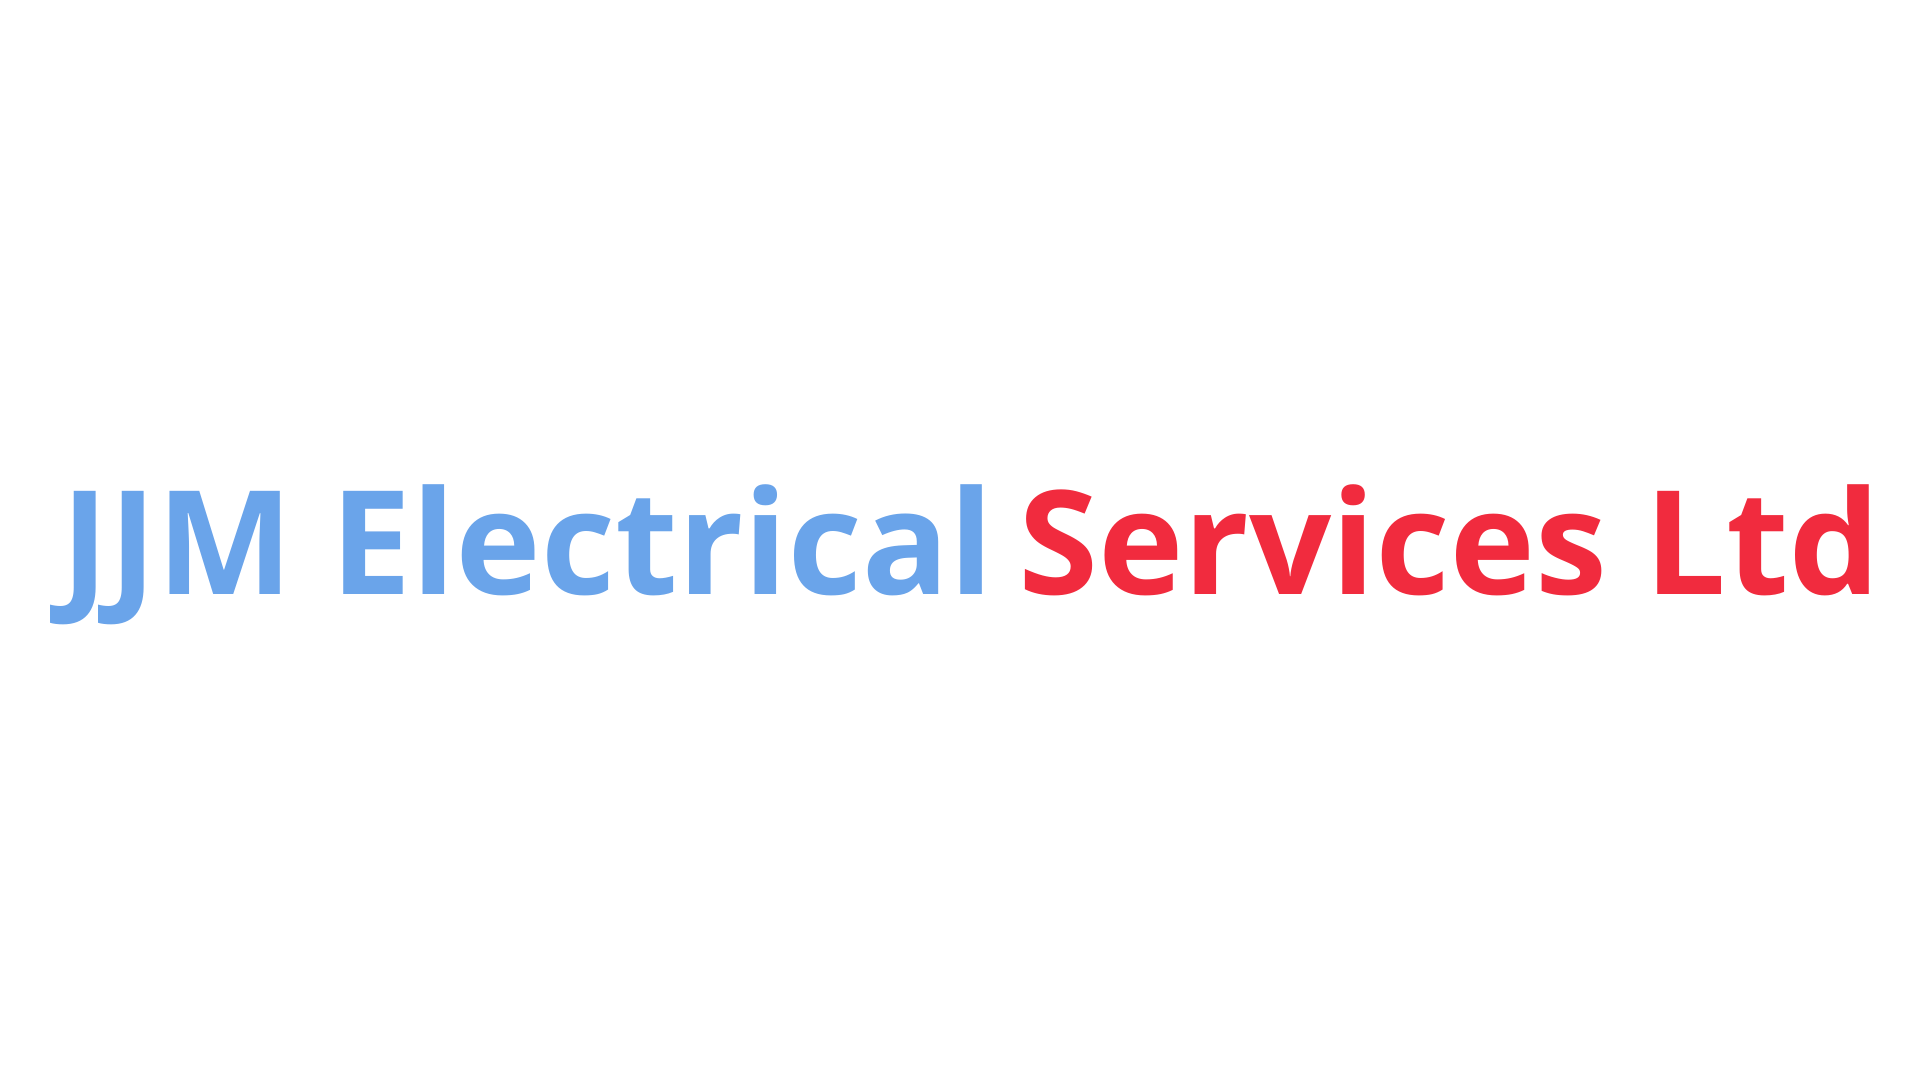 JJM Electrical Services